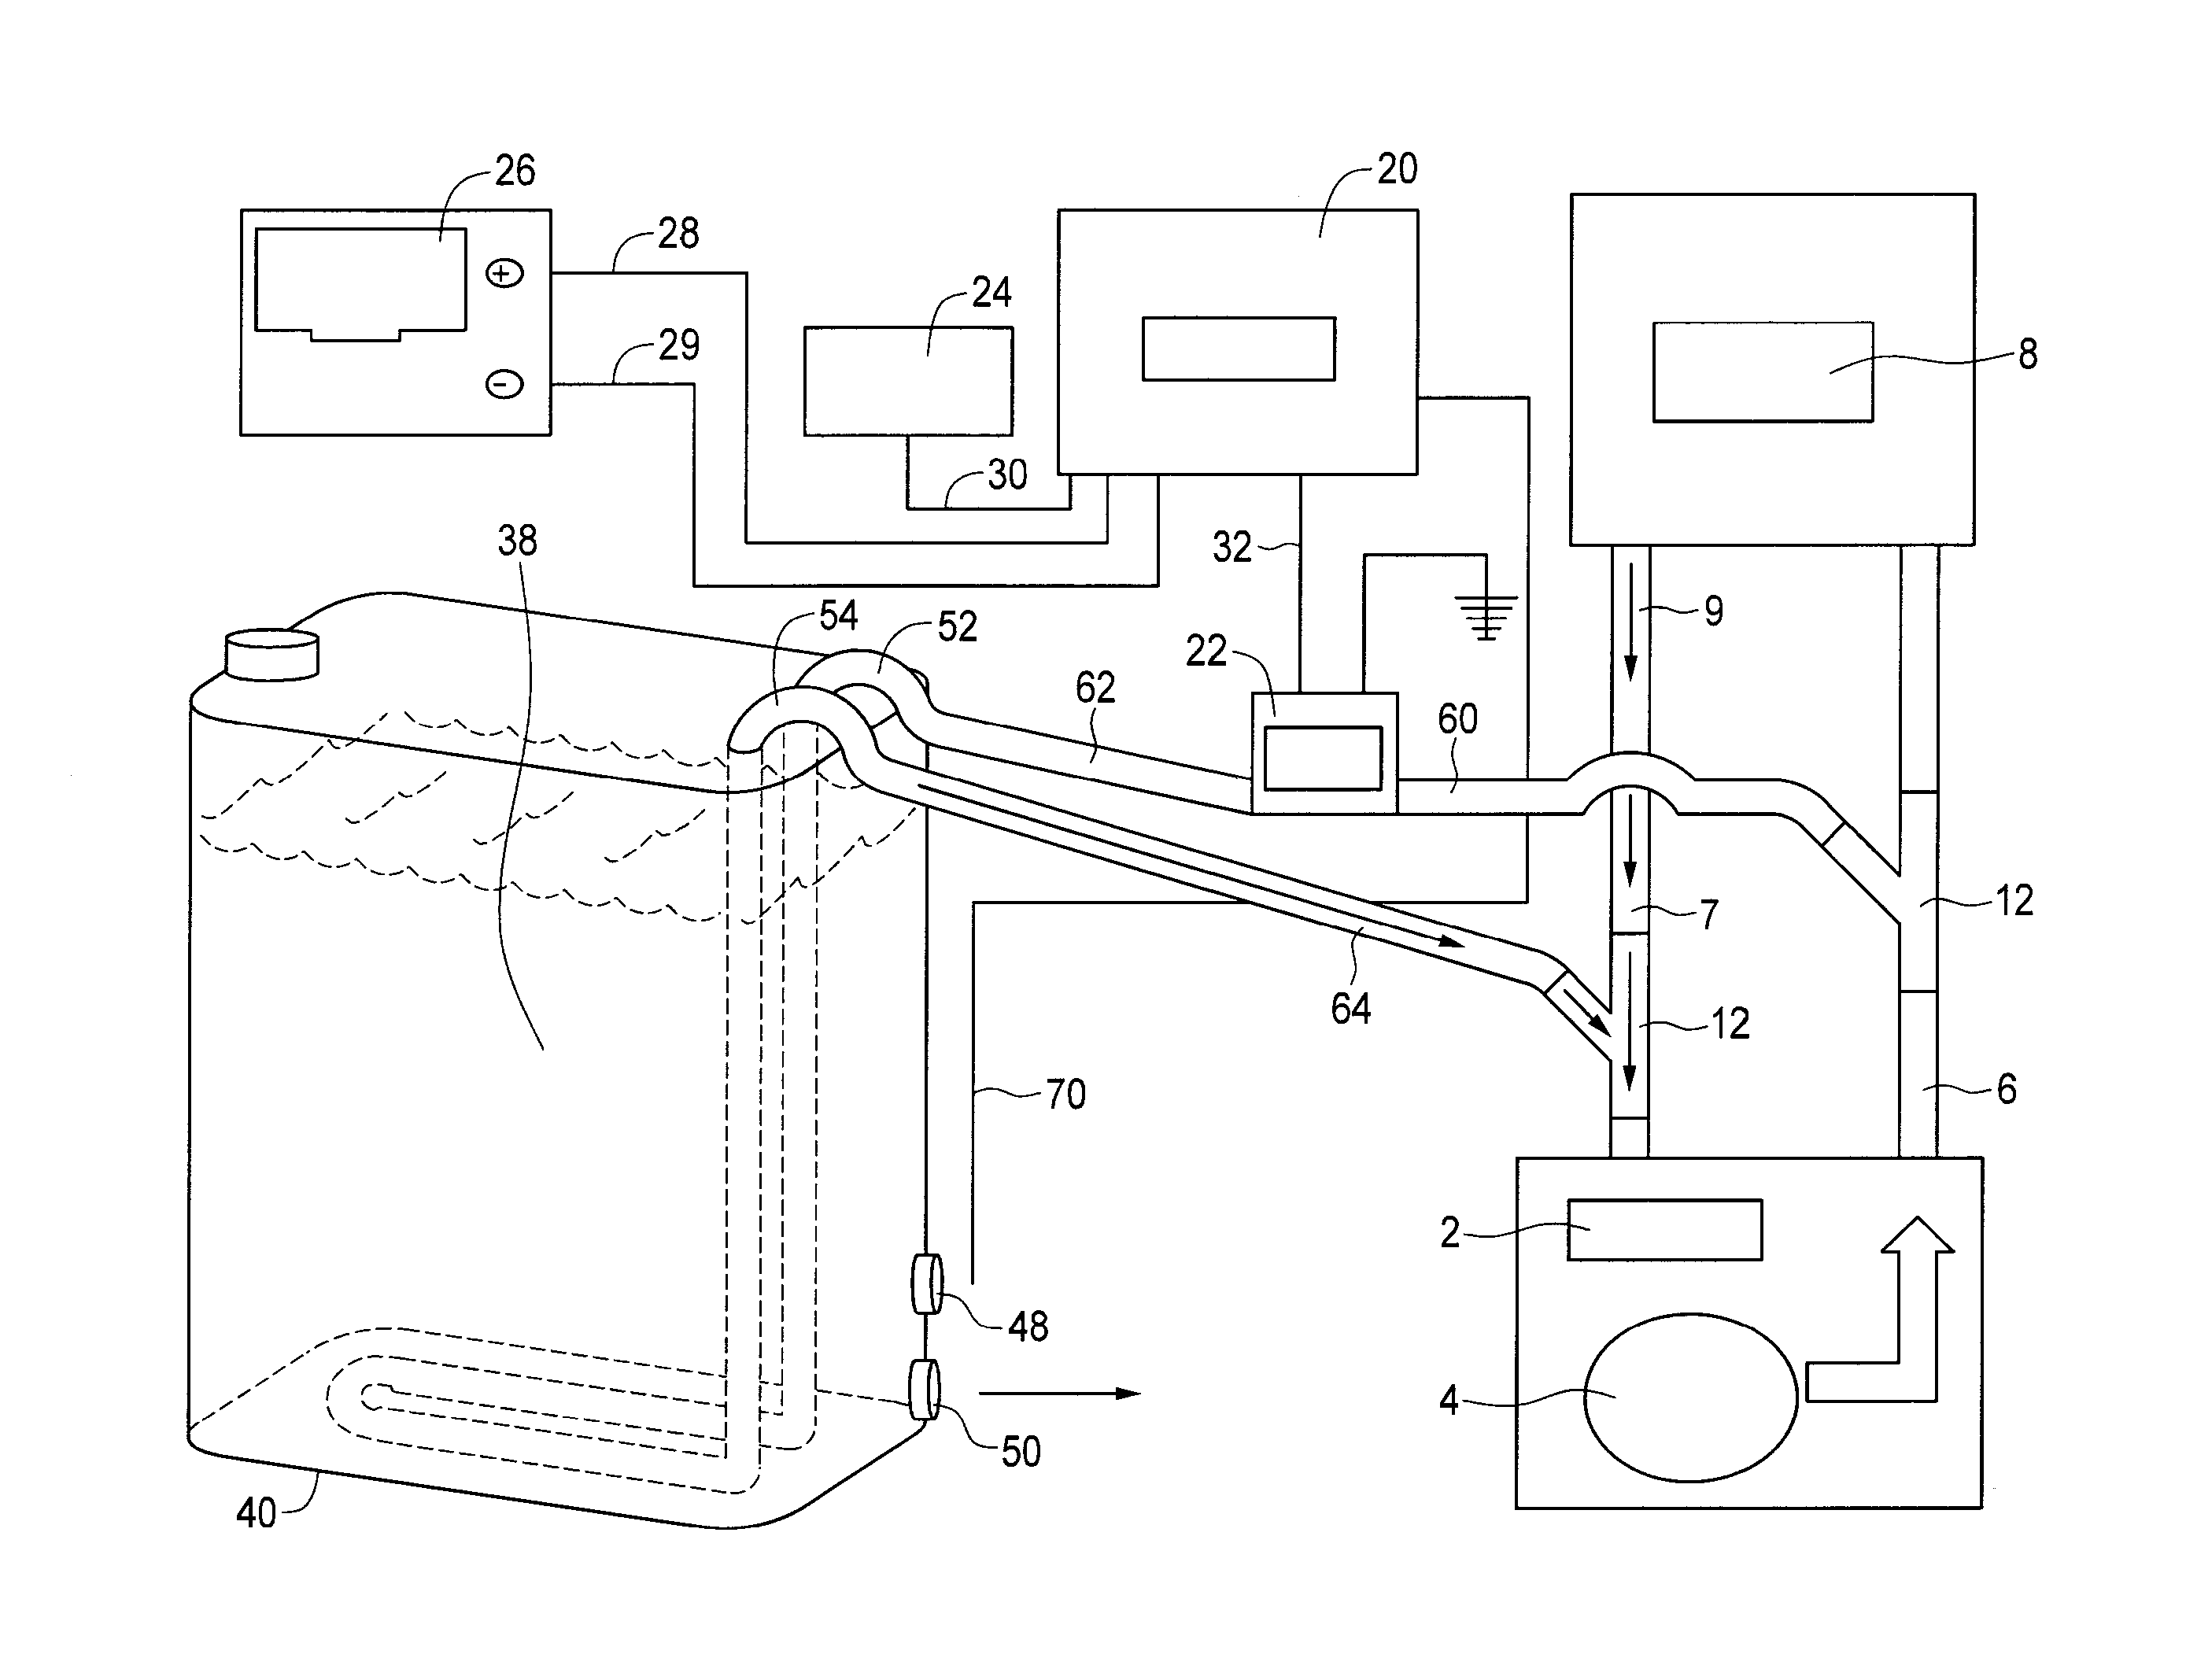 Windshield washer fluid heating apparatus, control system, and method of using same